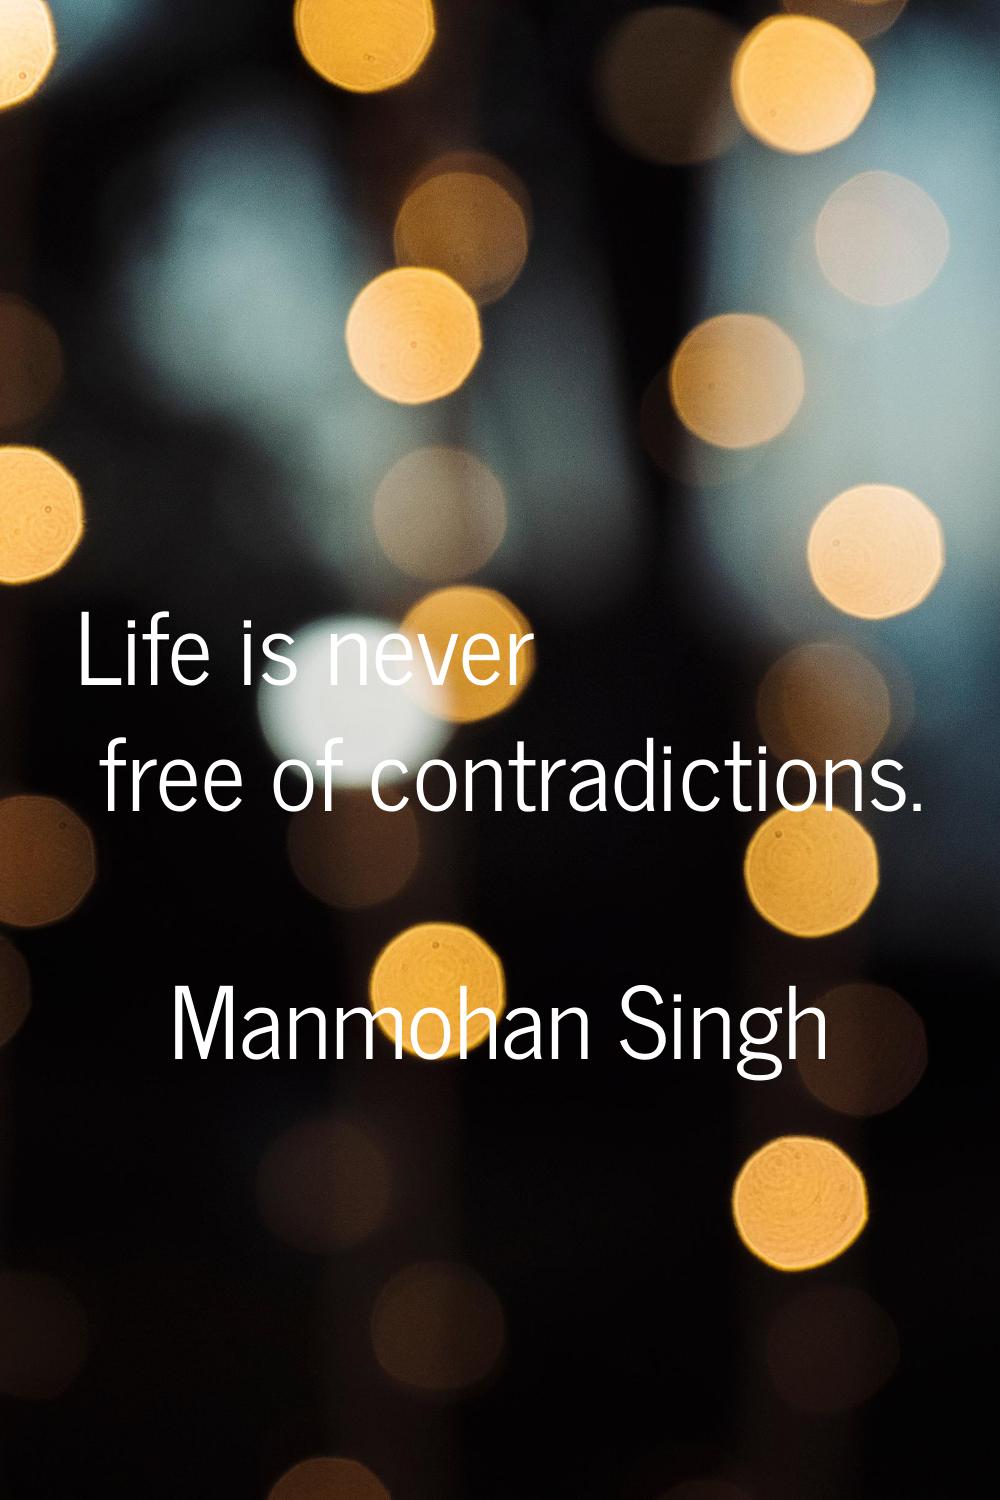 Life is never free of contradictions.